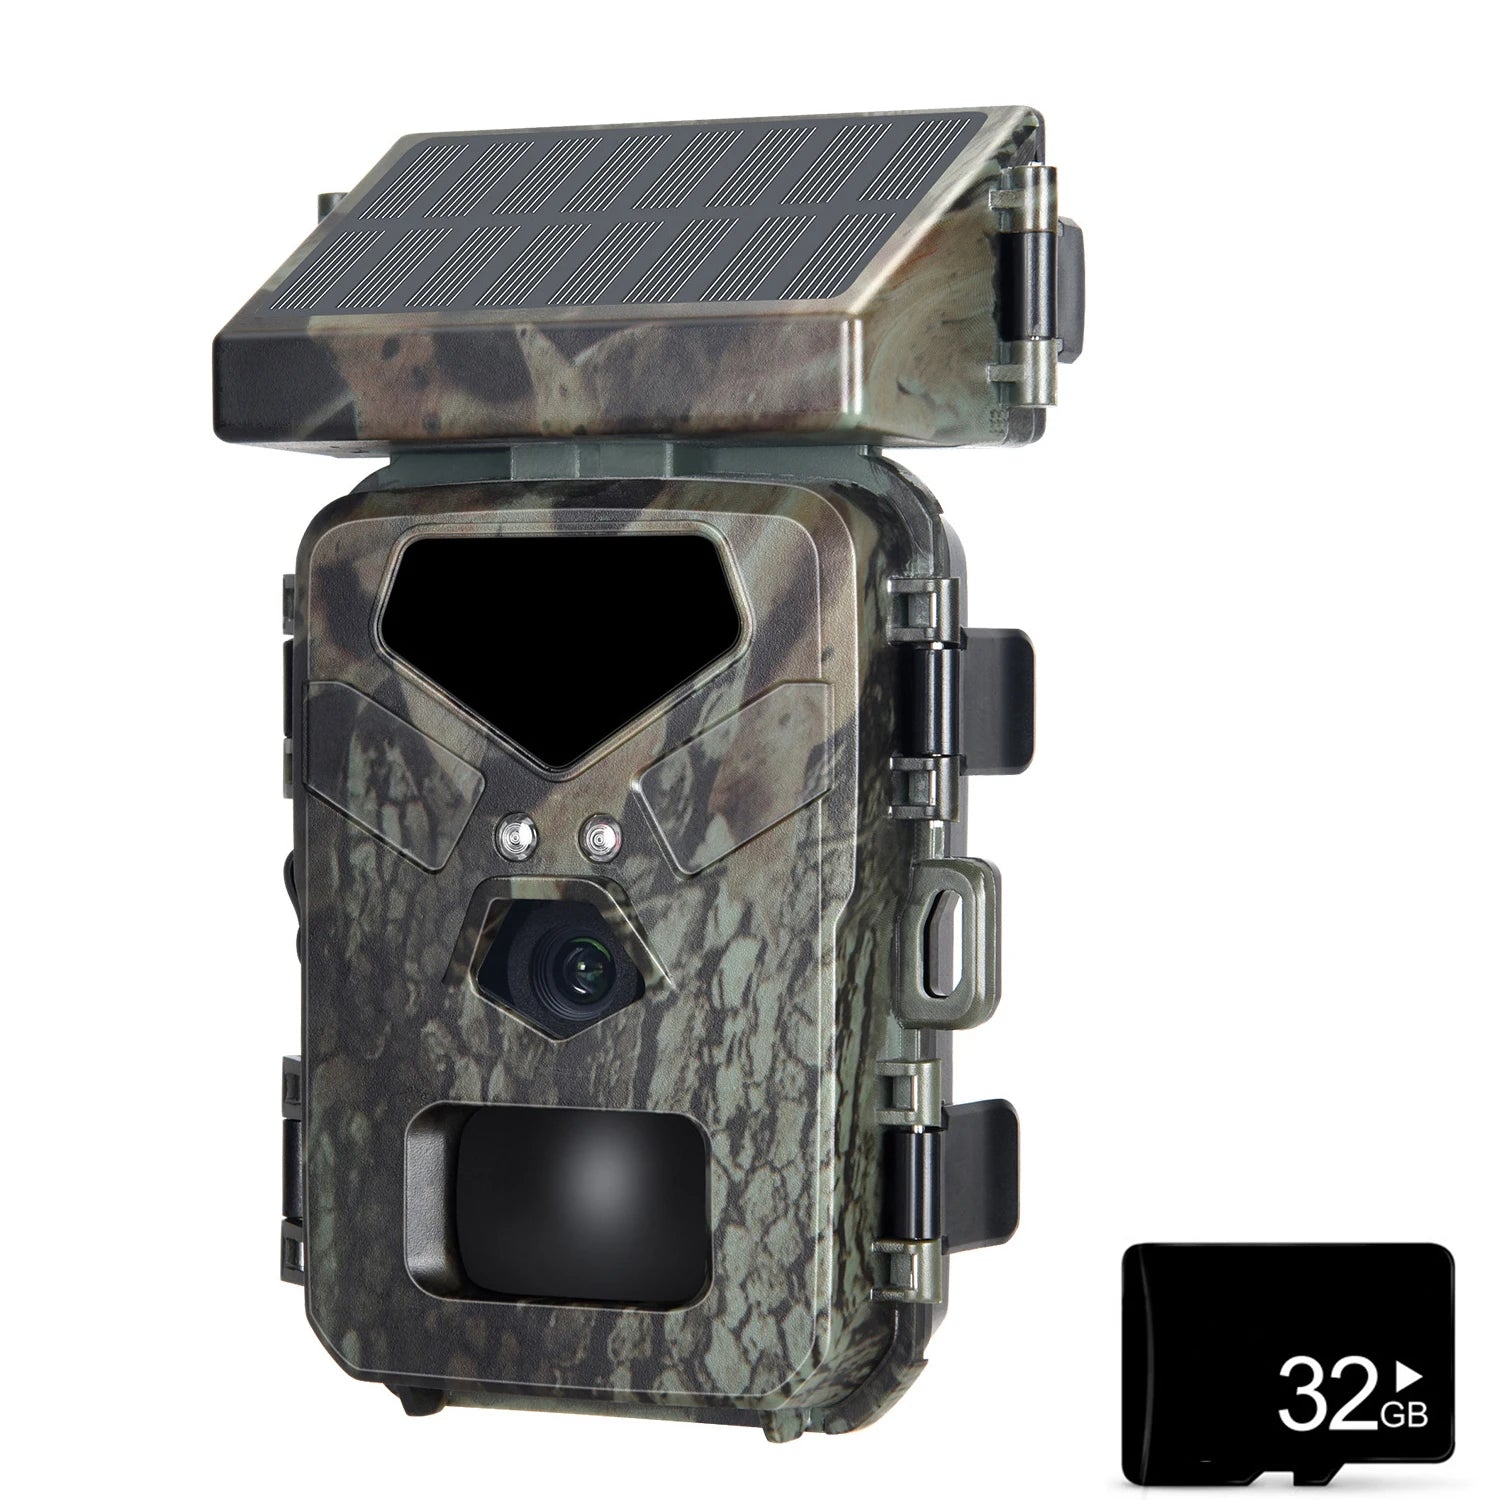 A rugged outdoor camera with advanced night vision, camouflaged design, and equipped with a solar panel for sustainable energy source, partially obscured with multiple control buttons and a 32GB storage capacity icon.